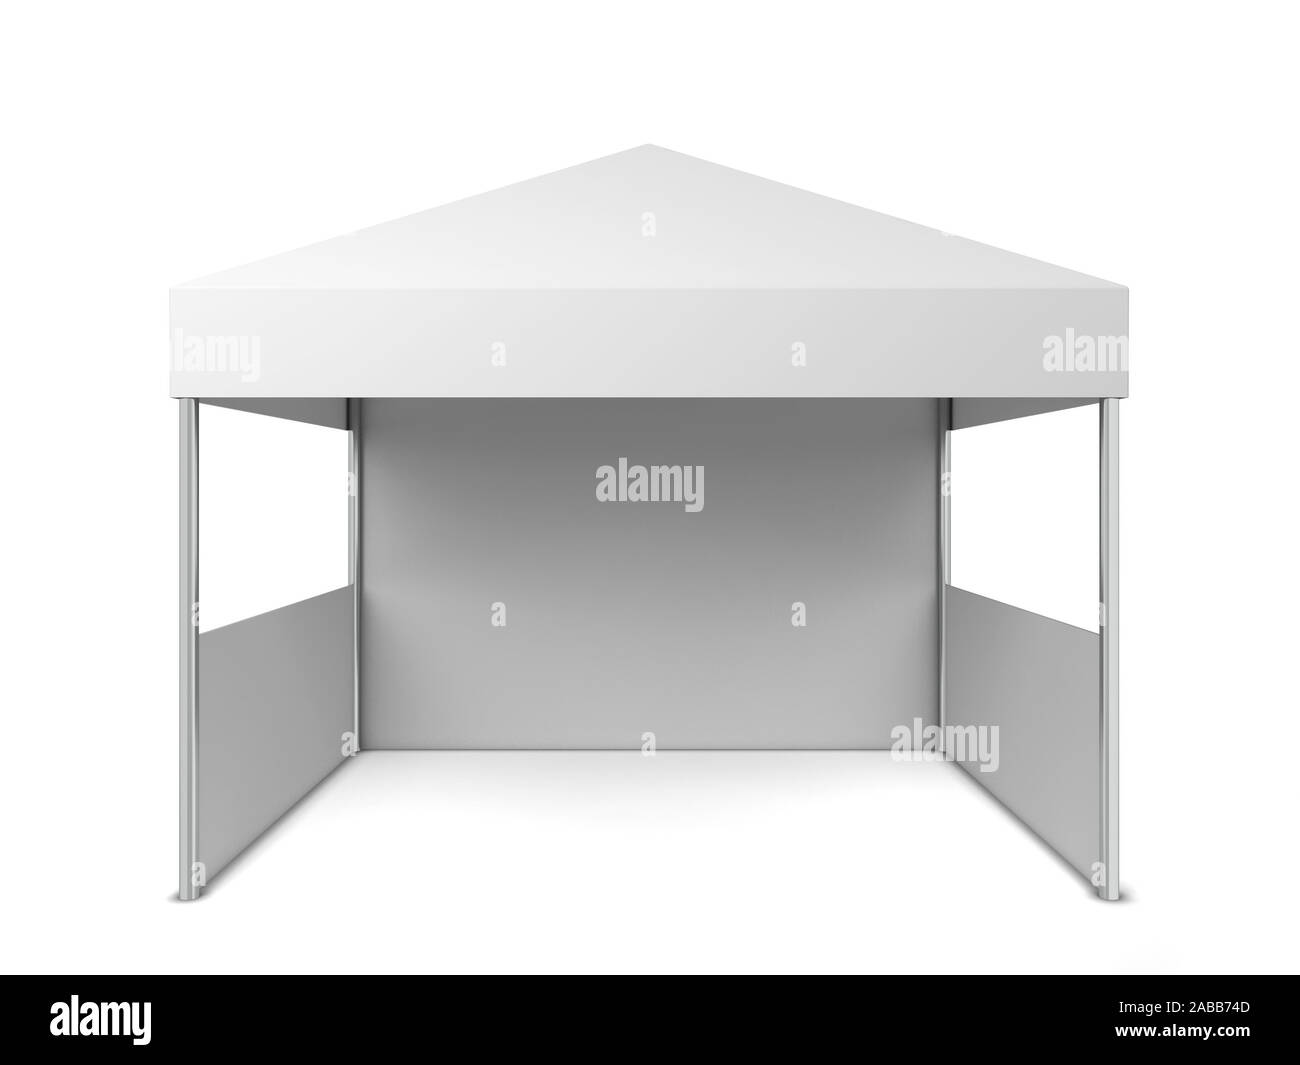 Blank tent. 3d illustration isolated on white background Stock Photo ...